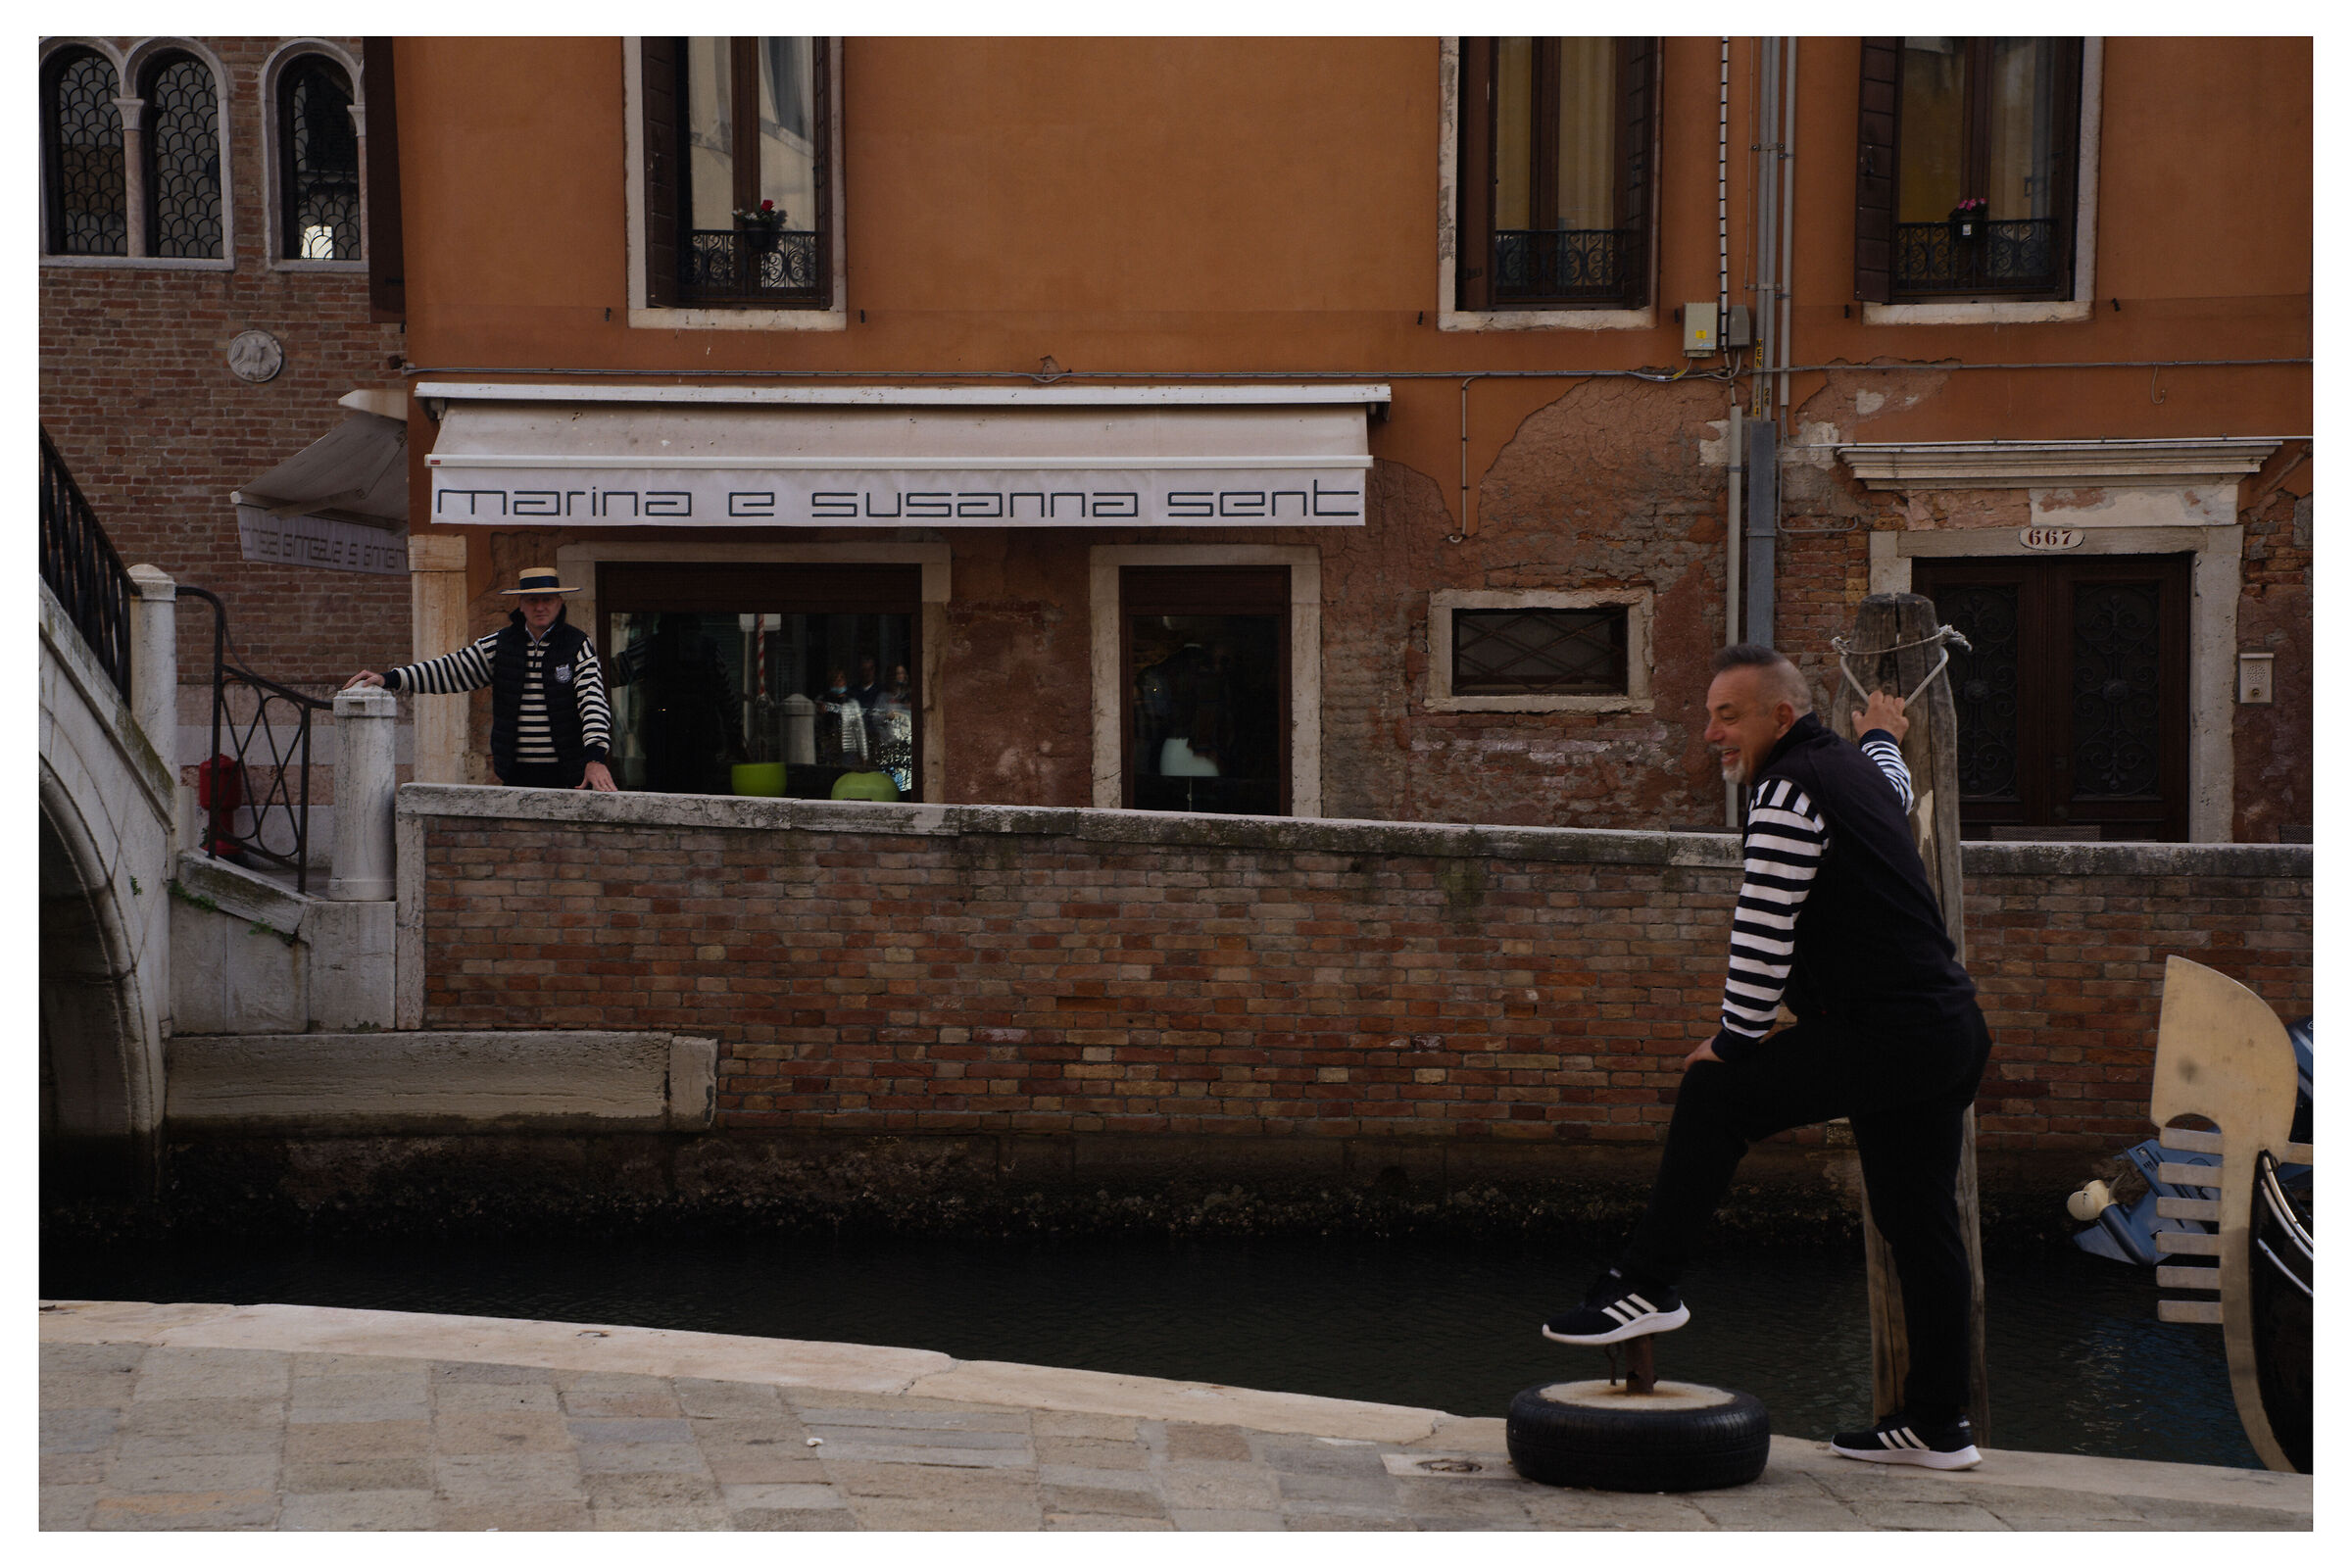 The gondoliers, waiting for customers...